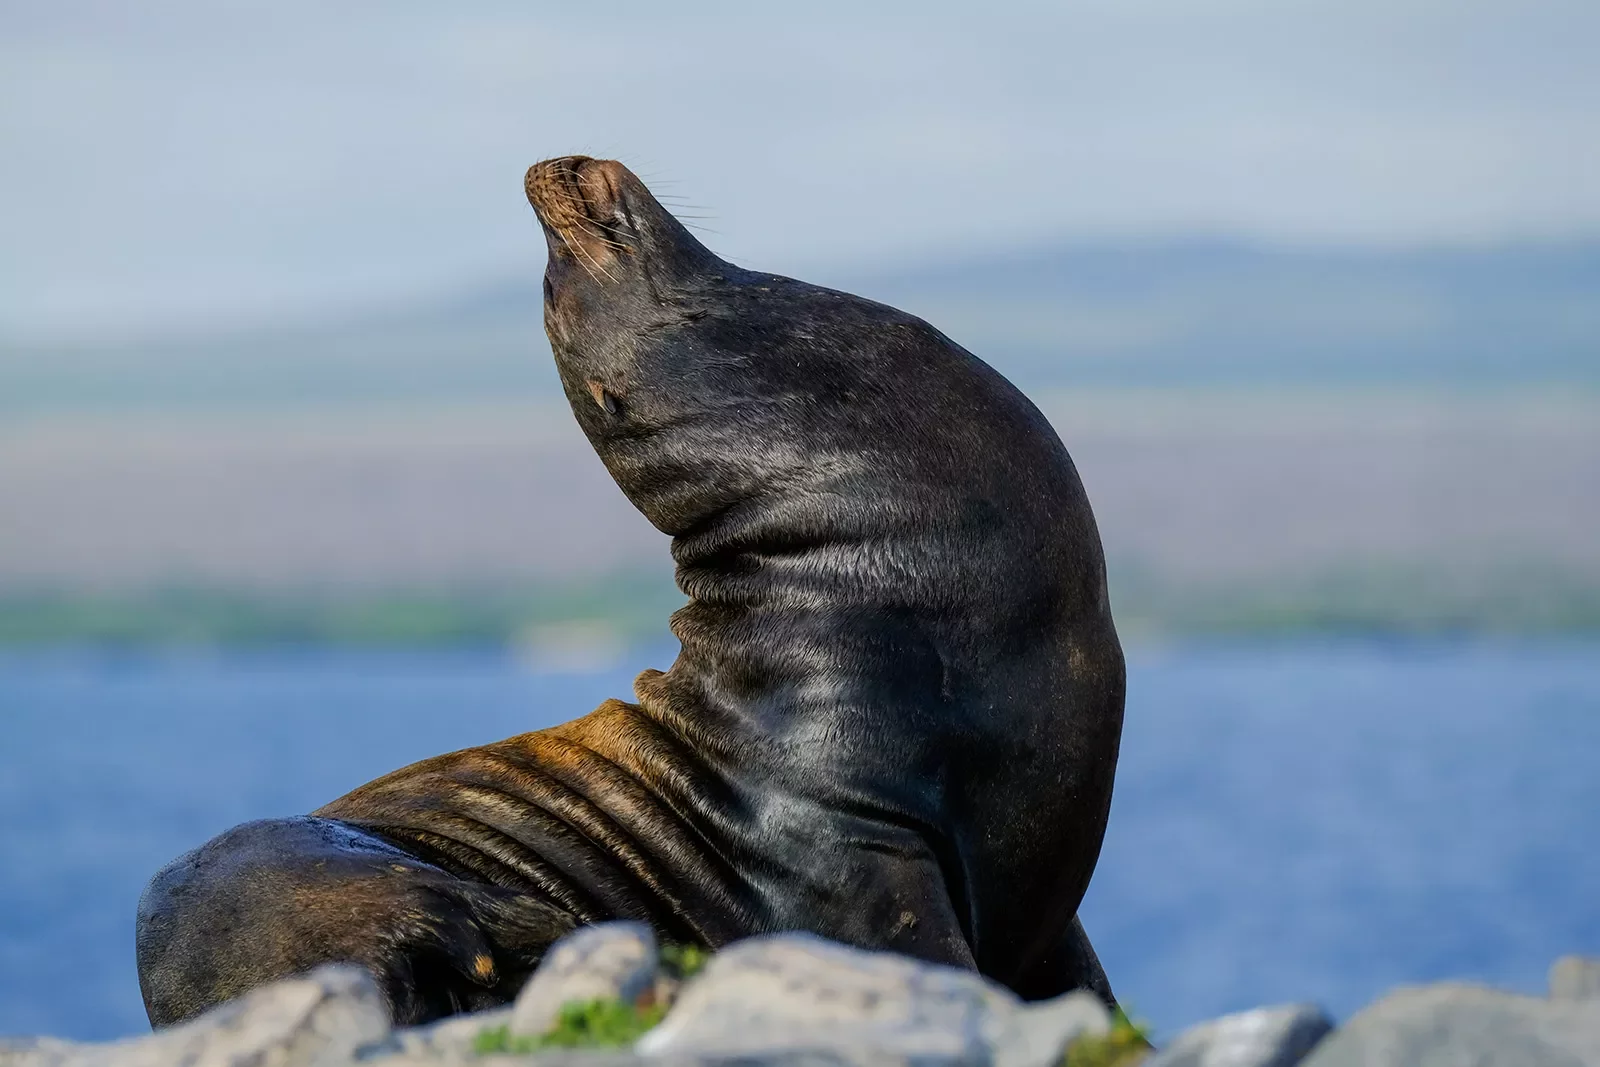 Seal stretching on a rock